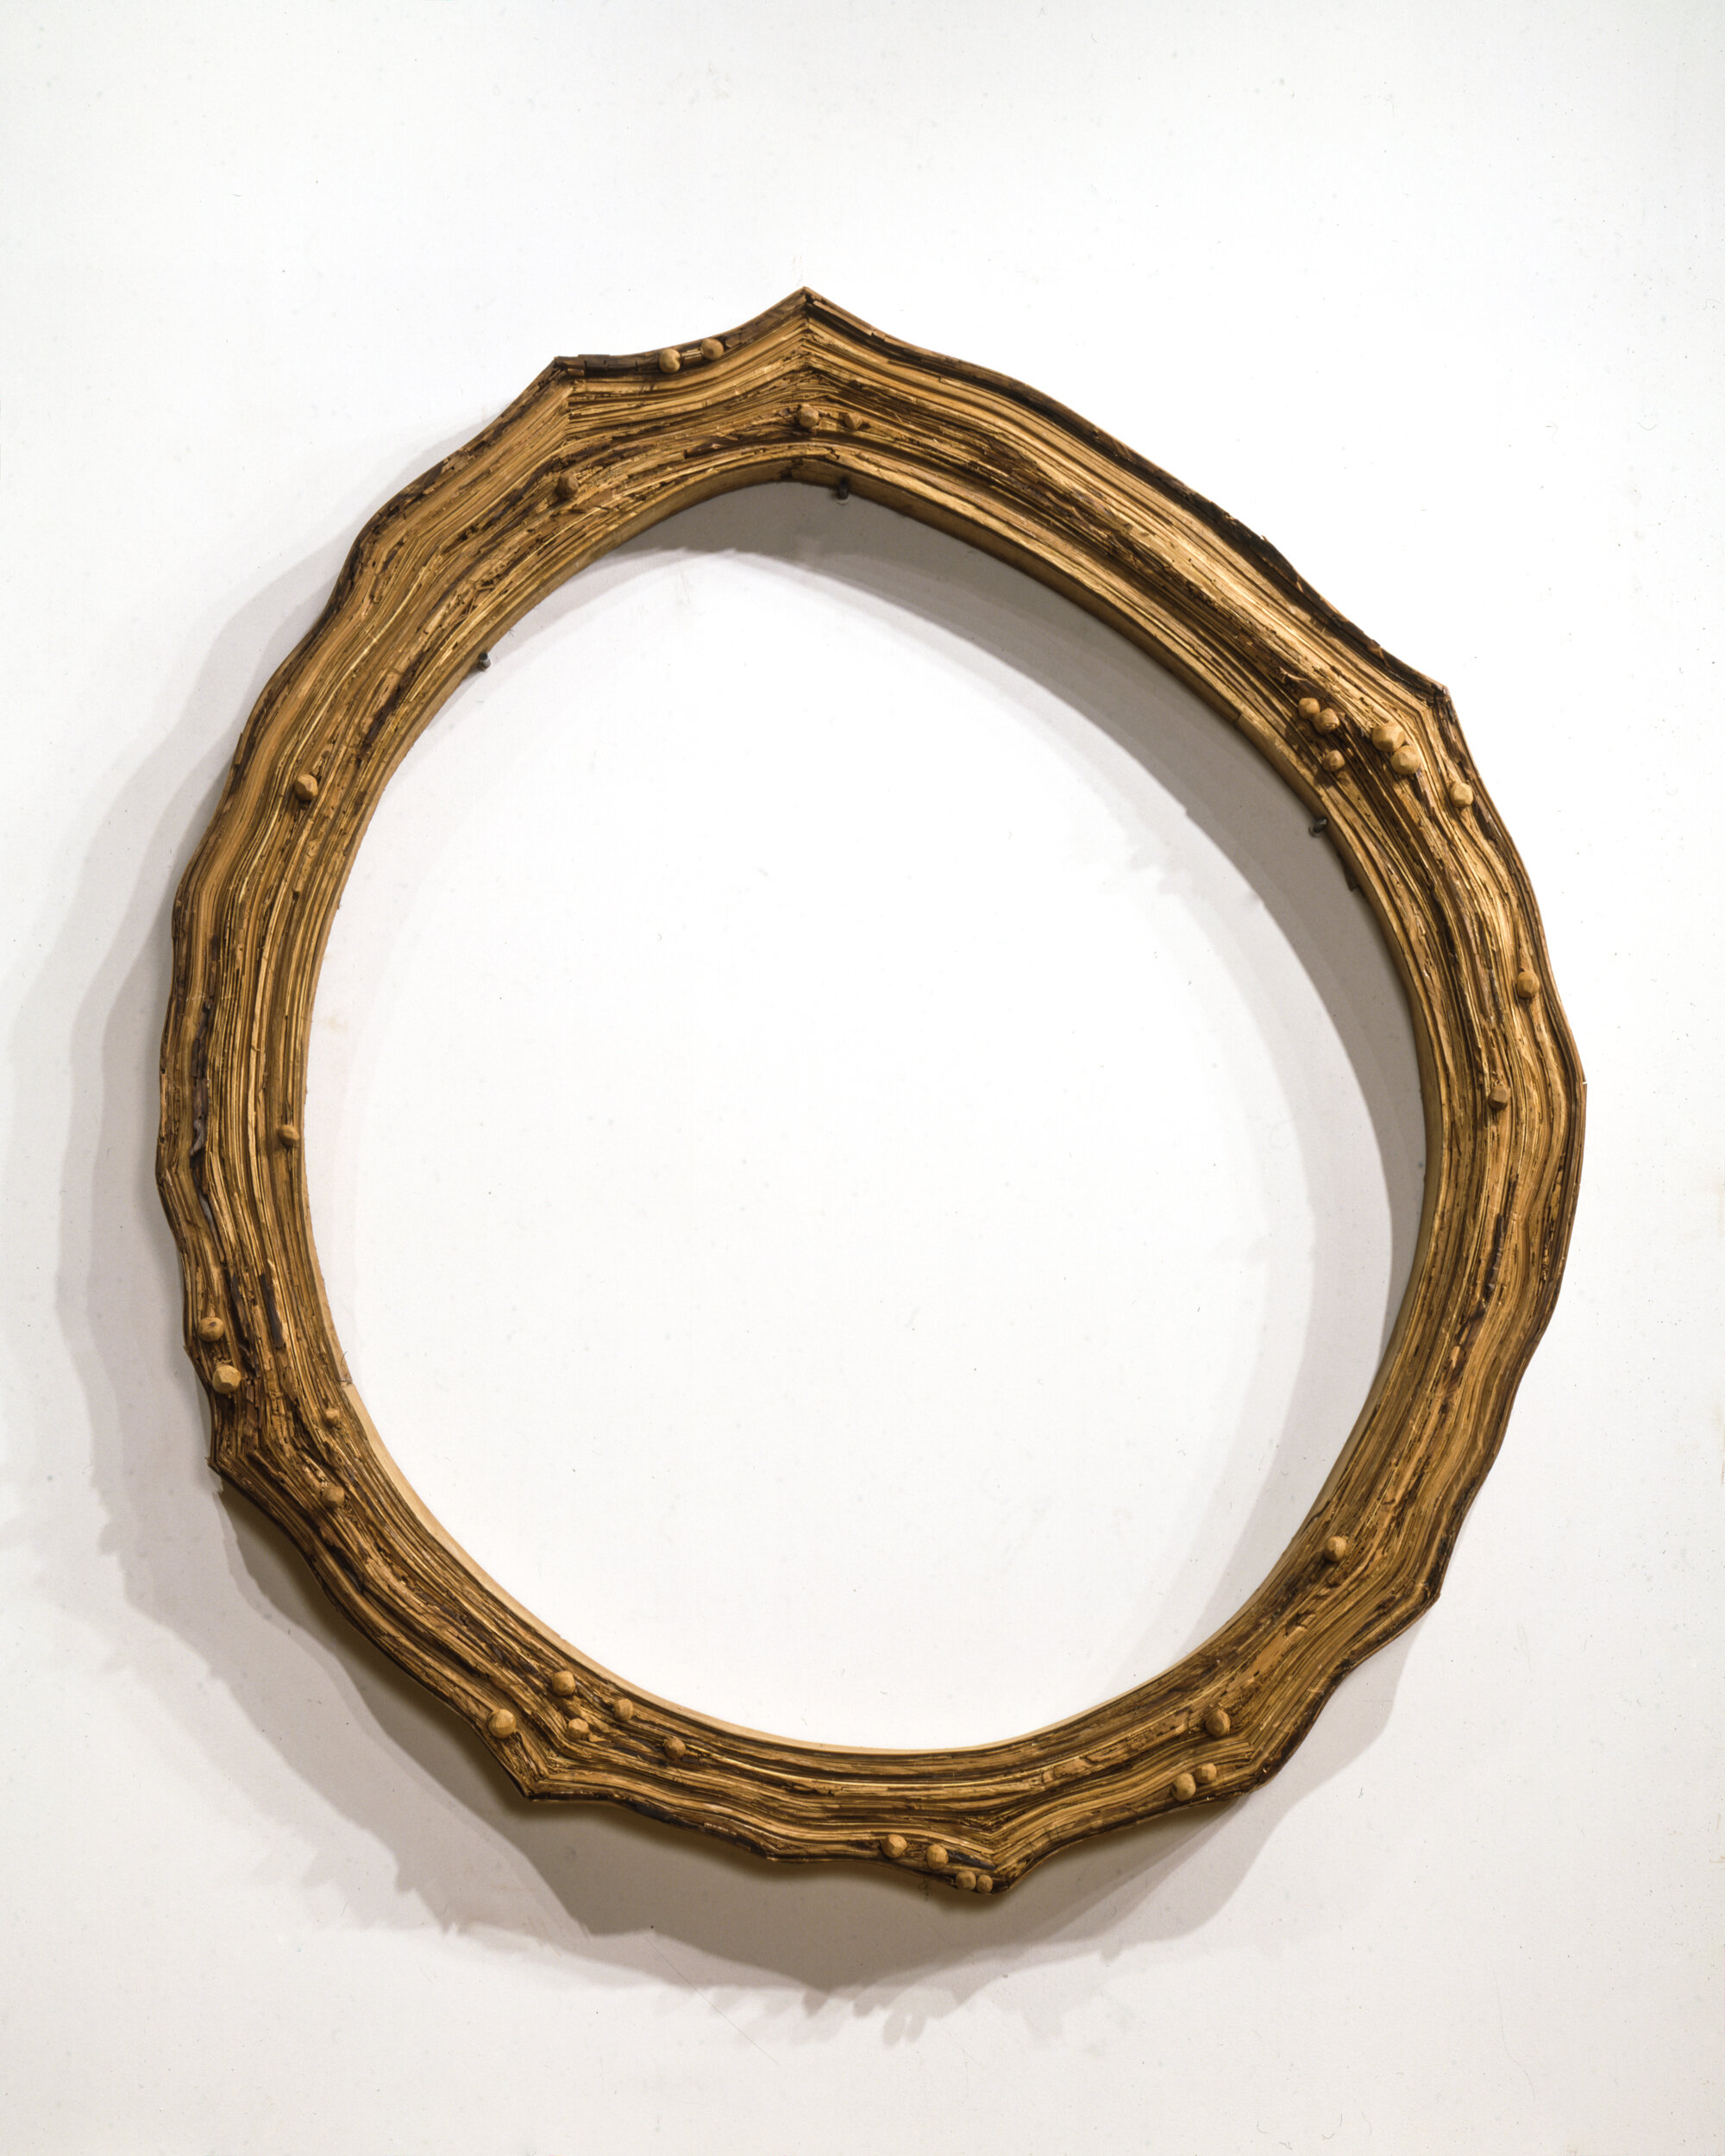       Large Ring , 2005-2006 Cedar 71 x 65 x 5 in.    MORE IMAGES   Galerie Lelong &amp; Co.  